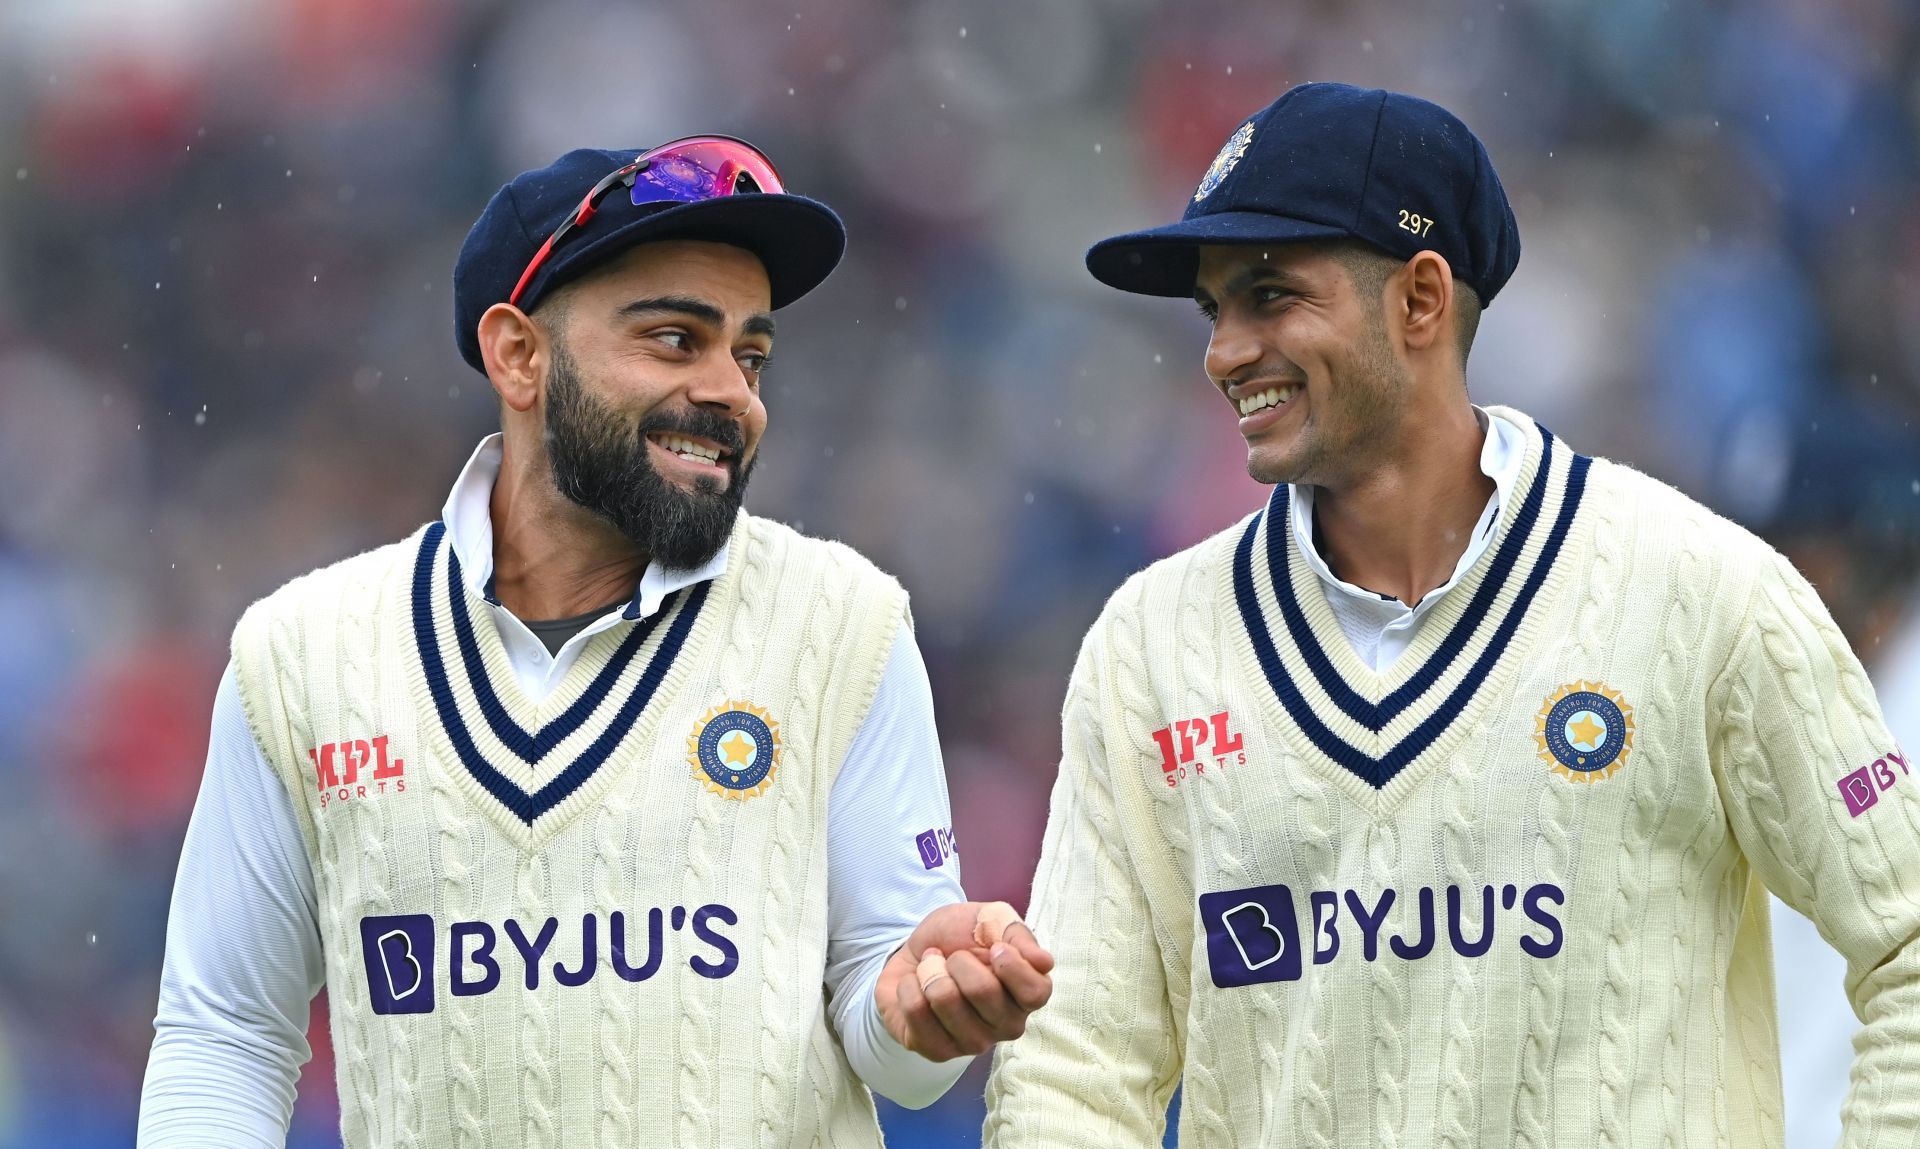 Shubman Gill (R) and Virat Kohli (L) are often spotted joking around together (Getty Images)